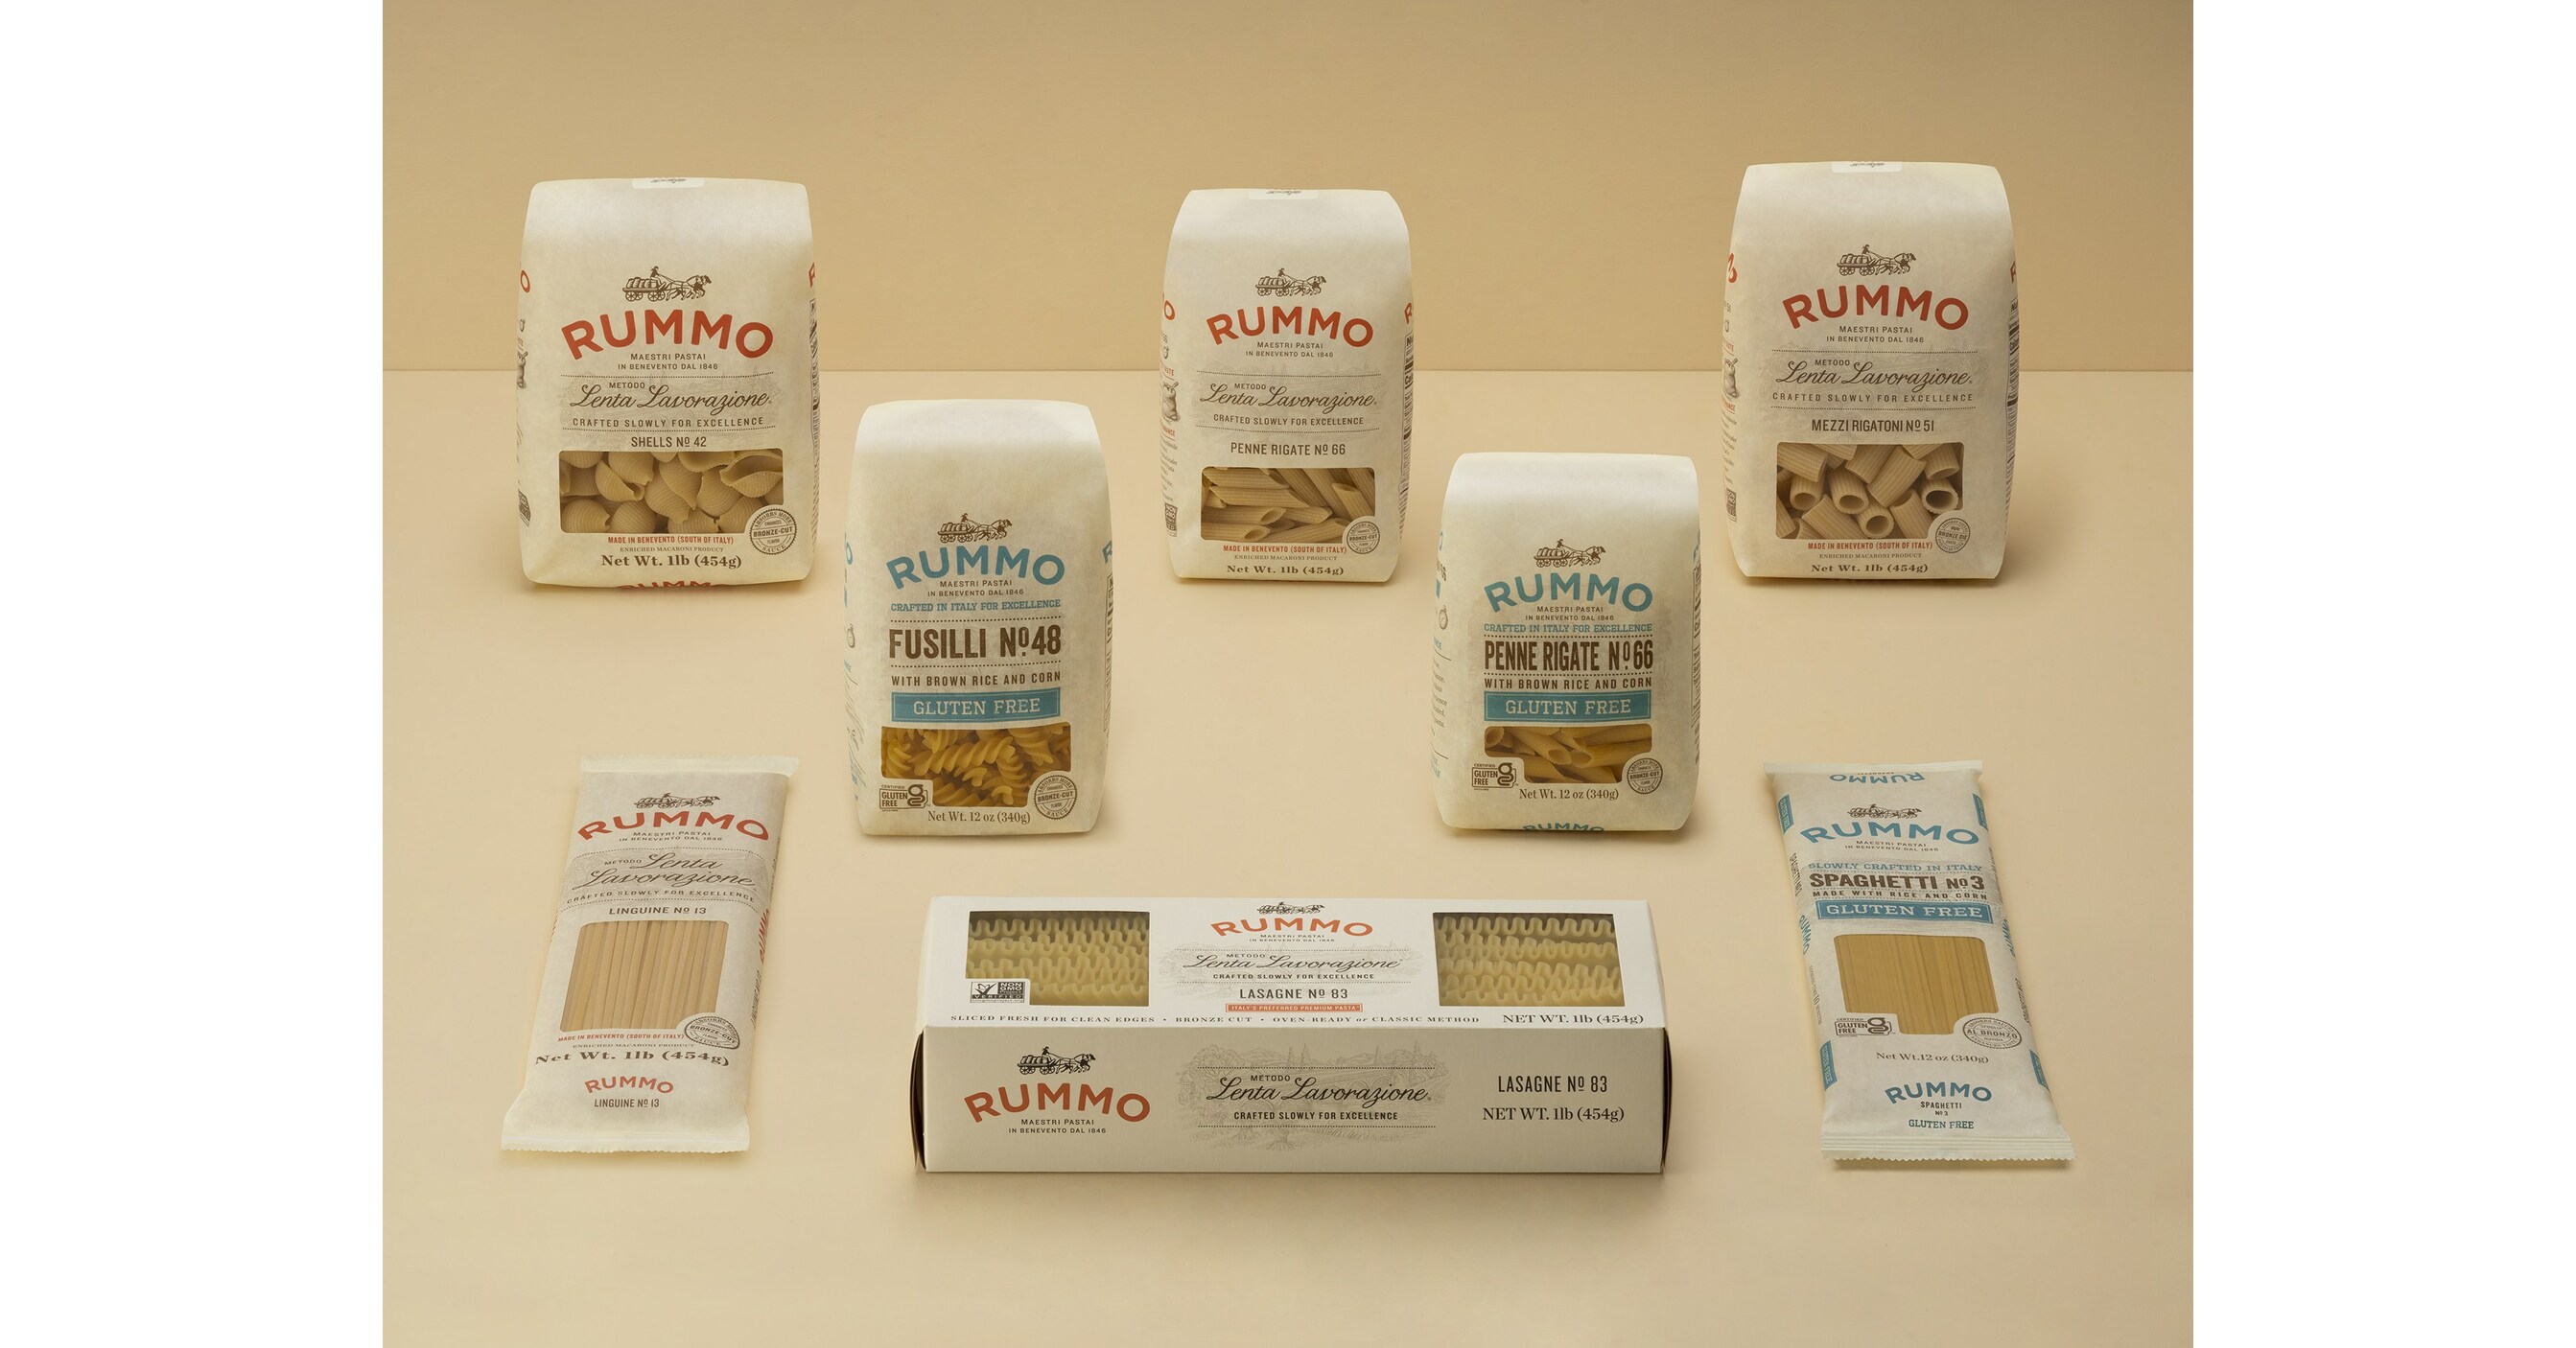 PASTA RUMMO LAUNCHES NATIONALLY IN WHOLE FOODS MARKET THIS SUMMER